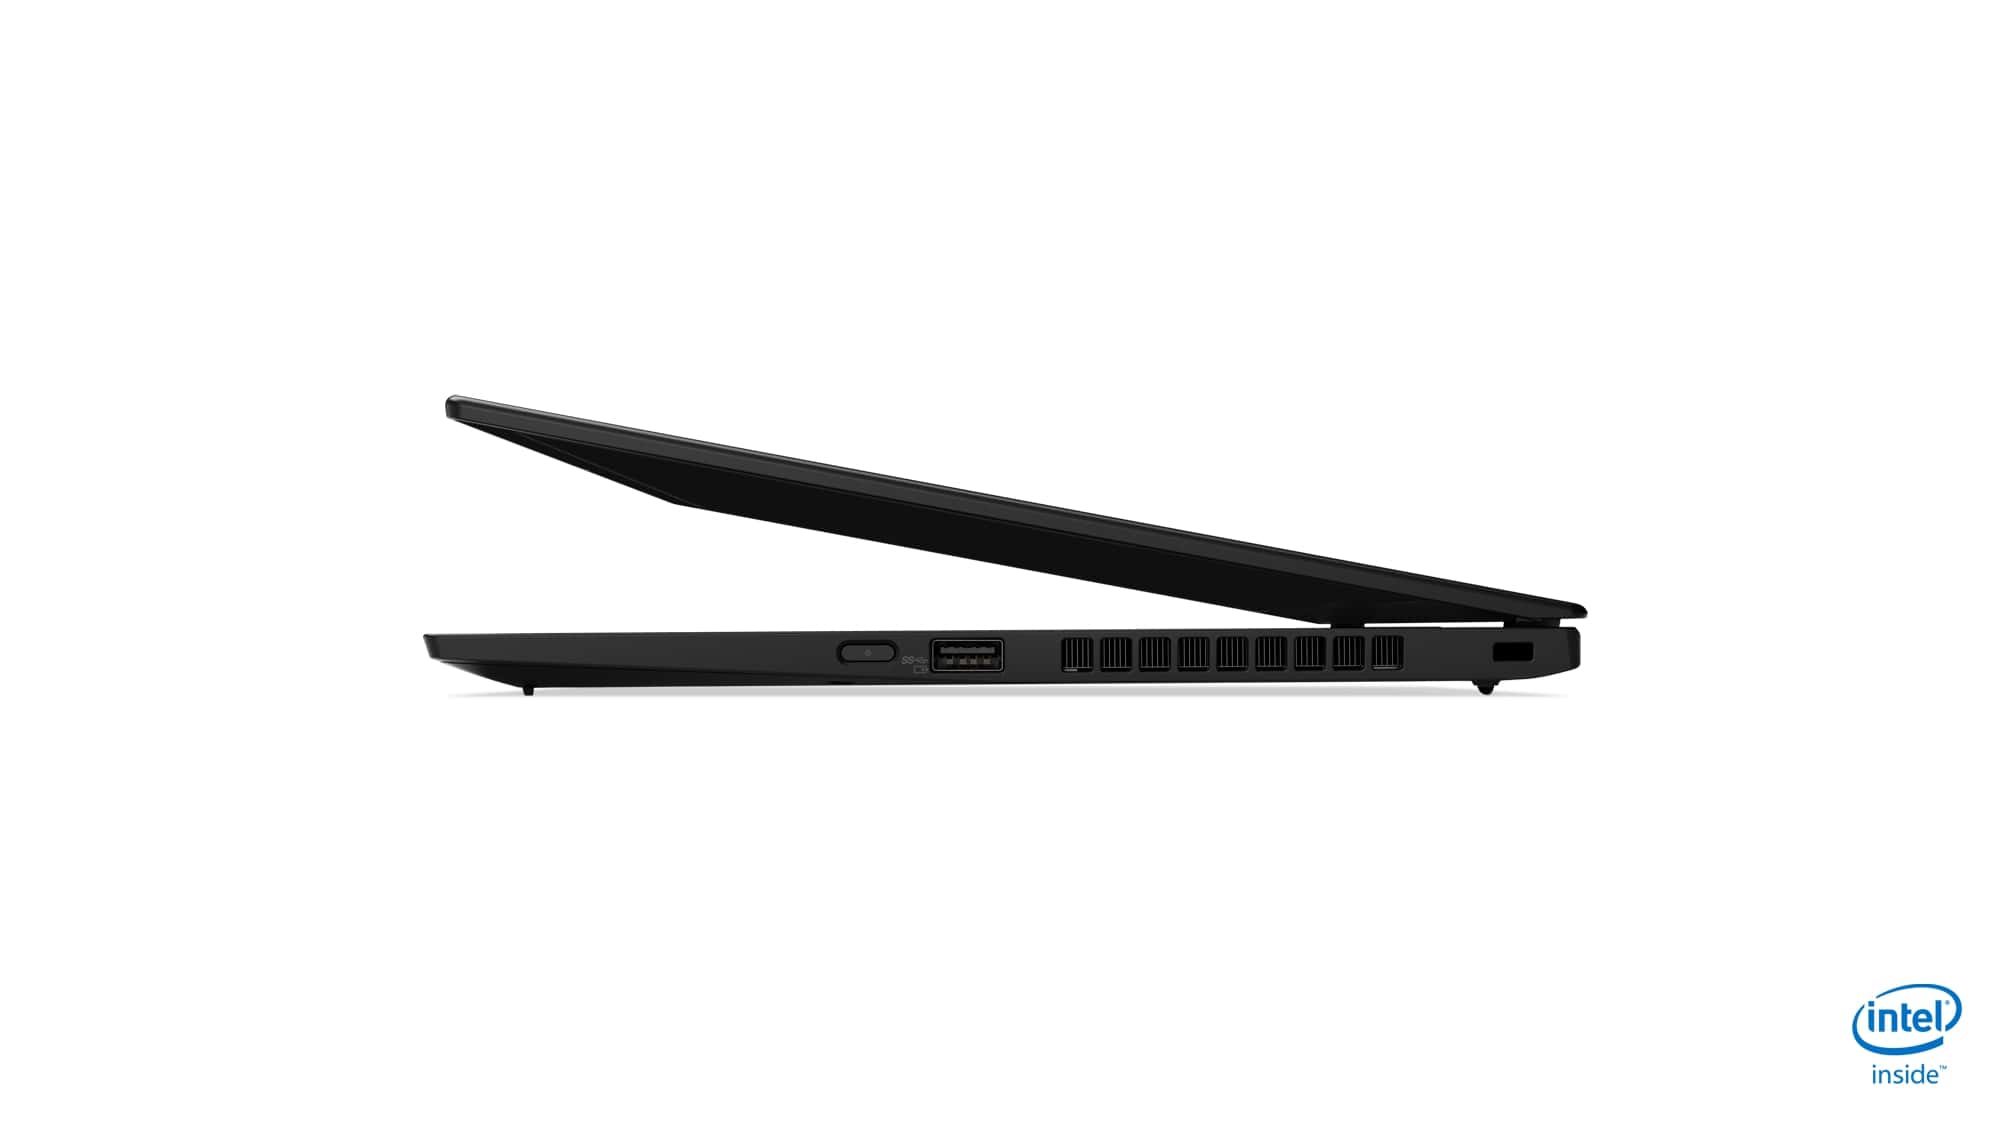 lenovo updated thinkpad x1 carbon yoga ces 2019 06 hero right with screen open